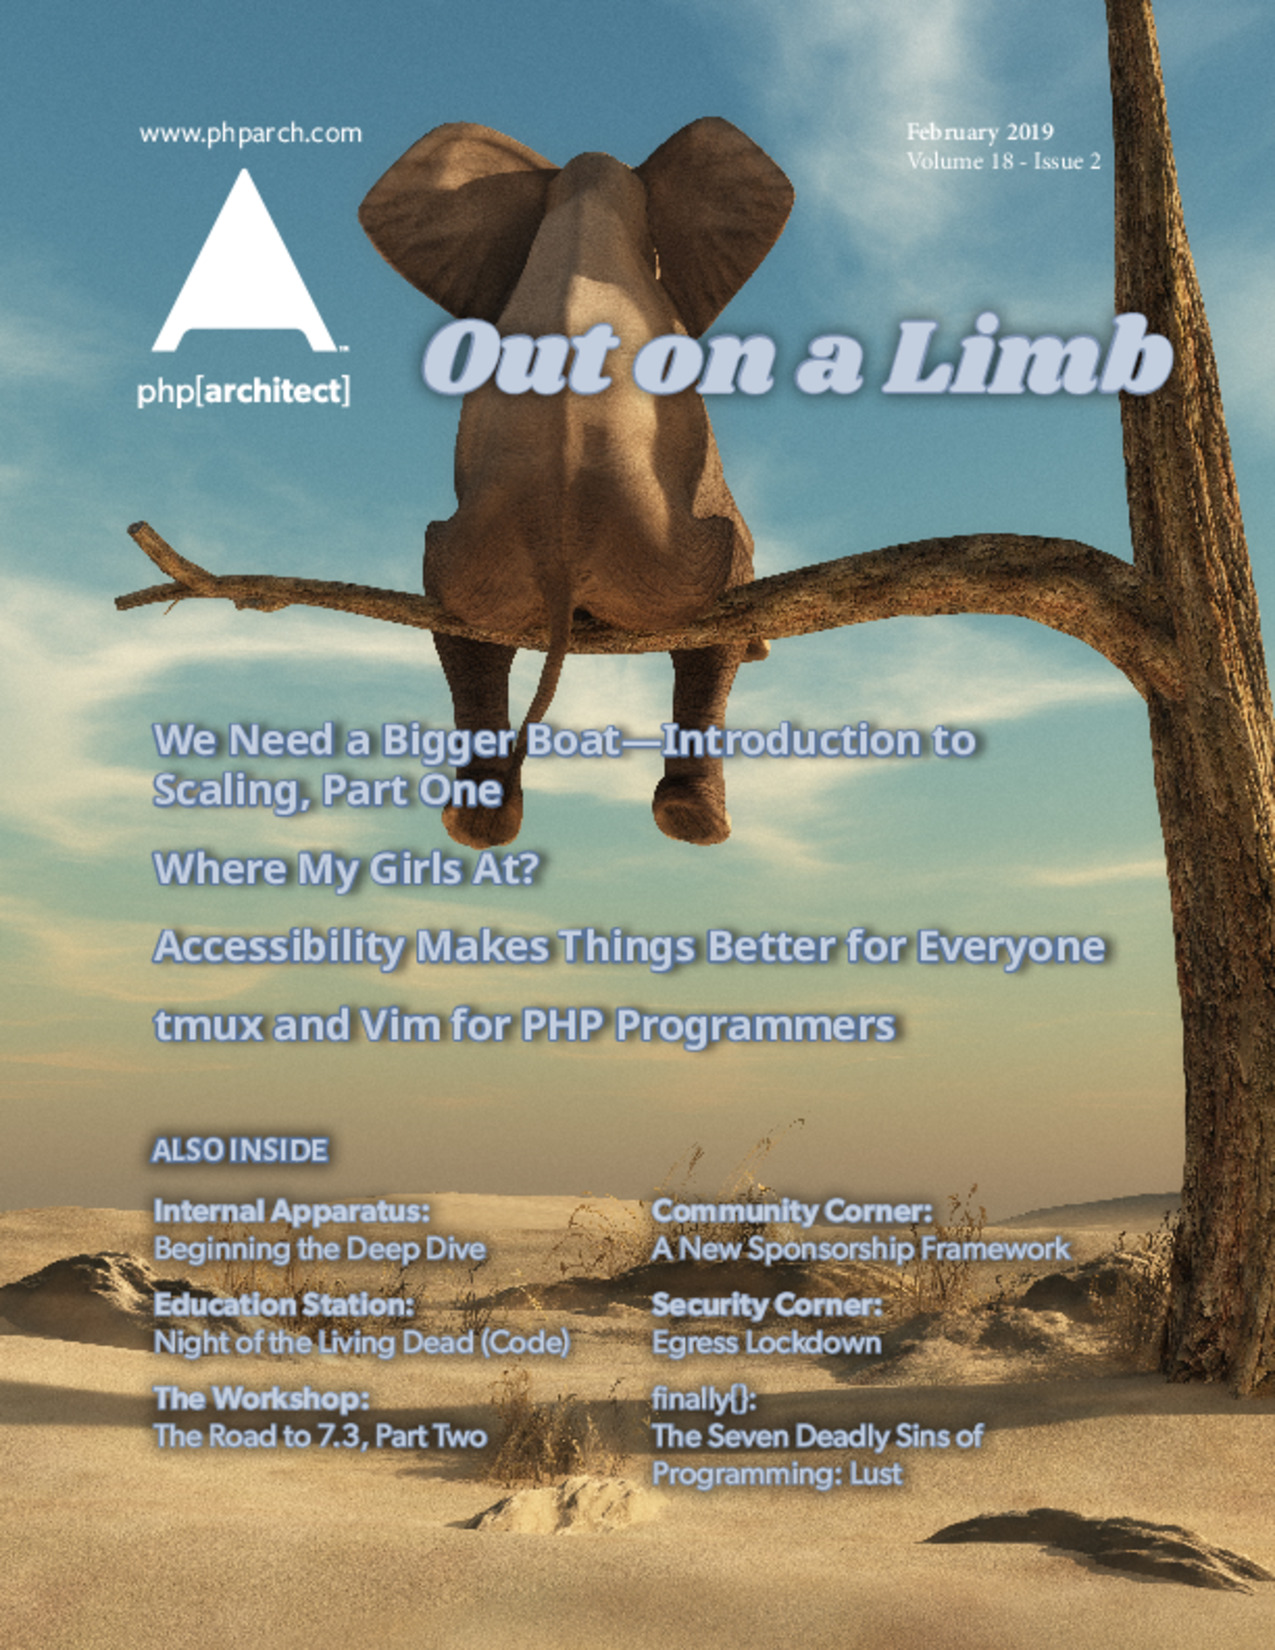 Magazine cover out on a limb showing an elephant sitting on a tree limb